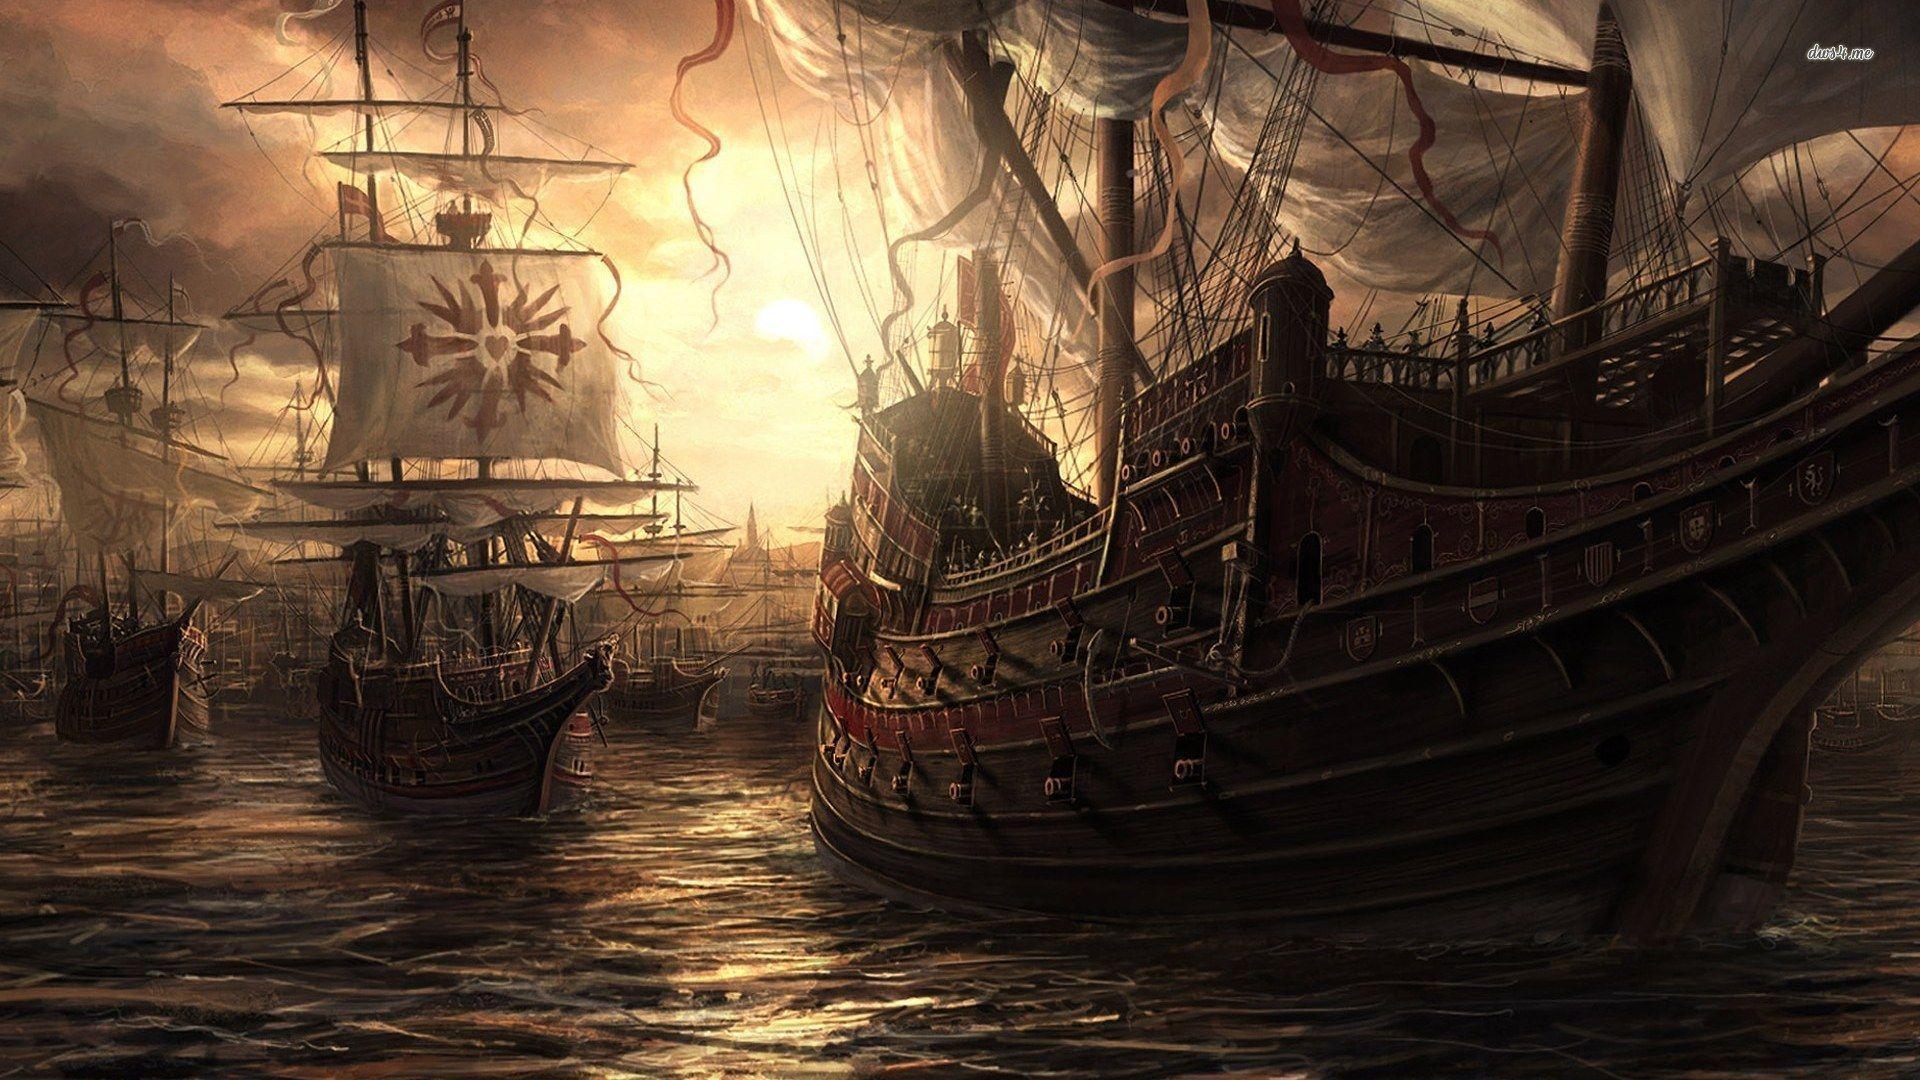 270+ Pirate HD Wallpapers and Backgrounds